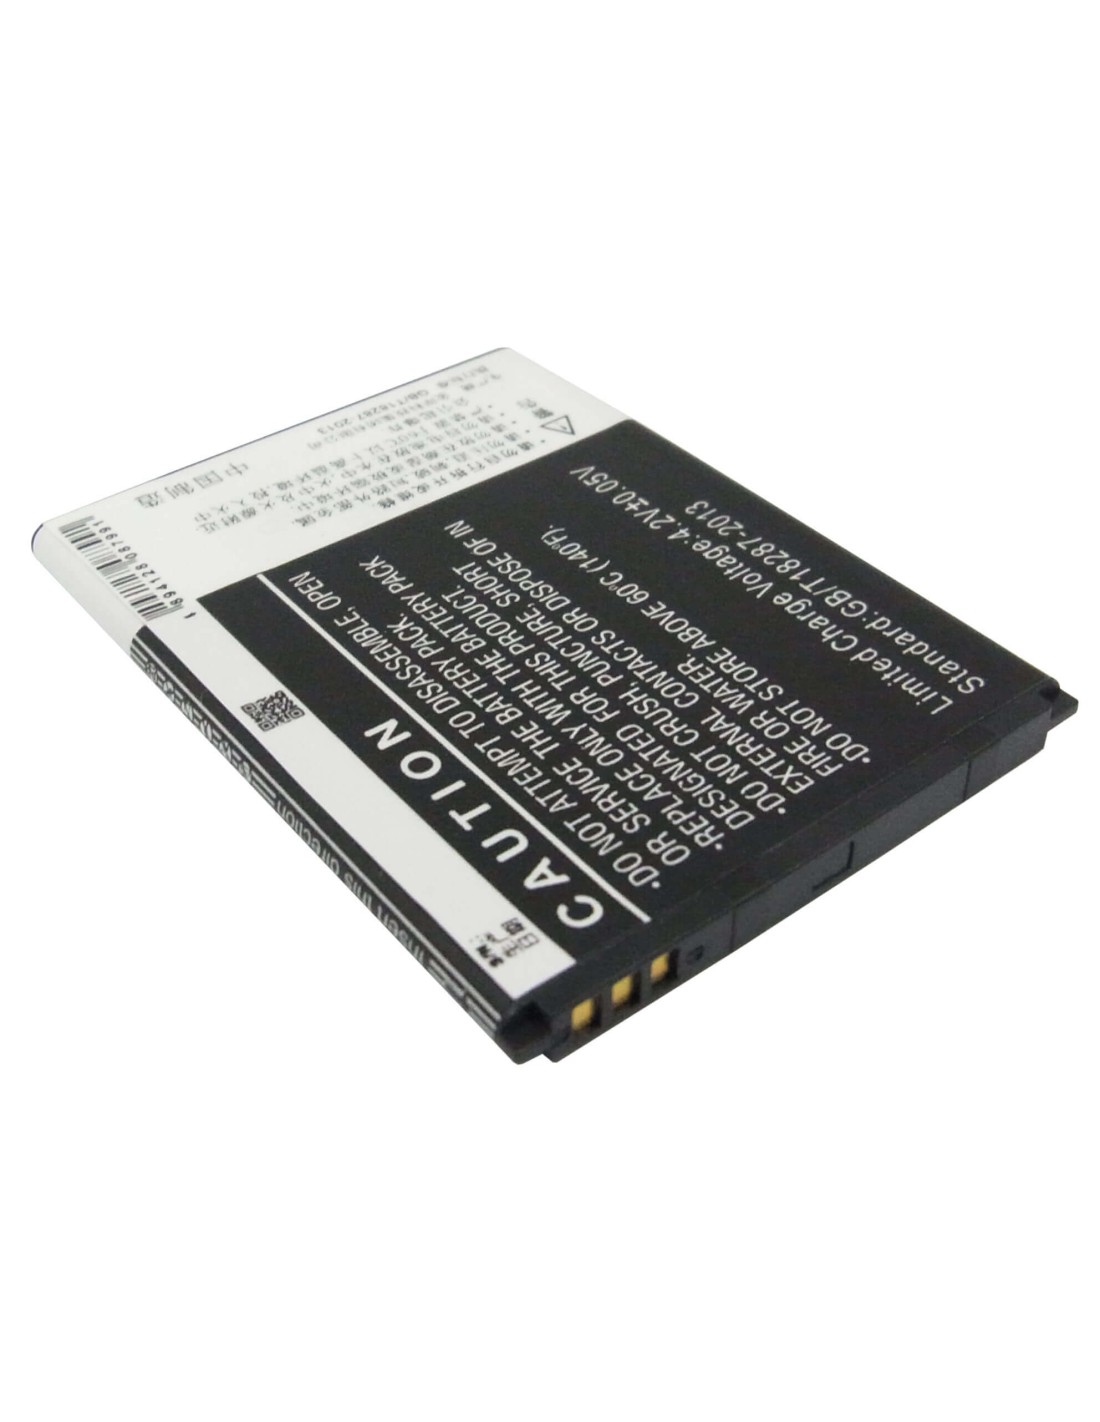 Battery for Coolpad 5210D, 5210A 3.7V, 1100mAh - 4.07Wh